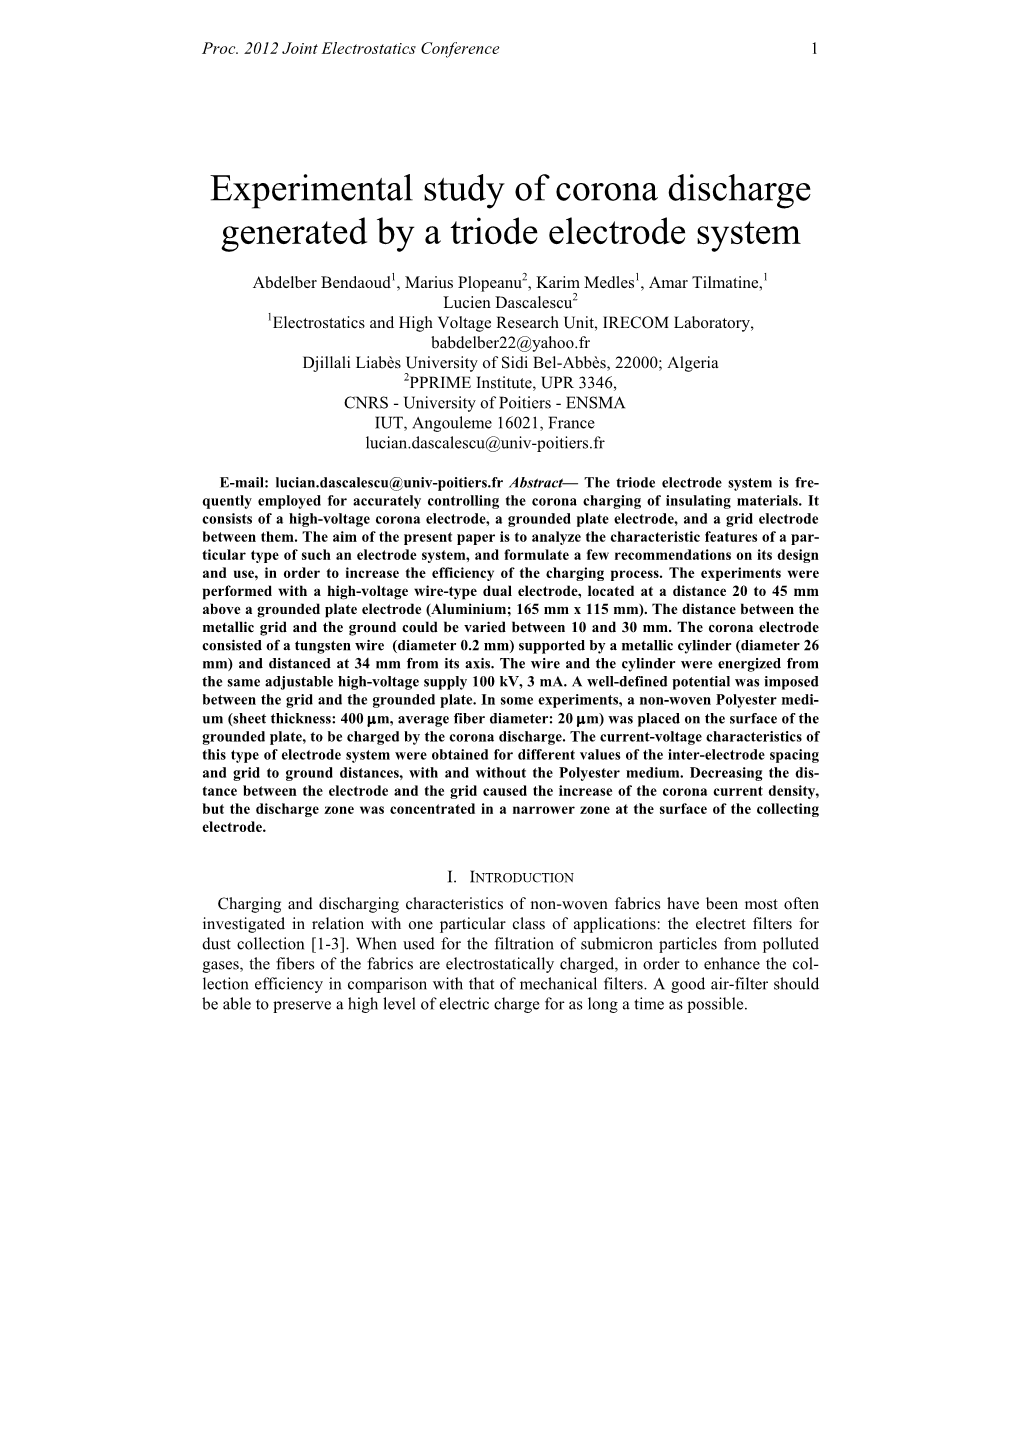 Experimental Study of Corona Discharge Generated by a Triode Electrode System